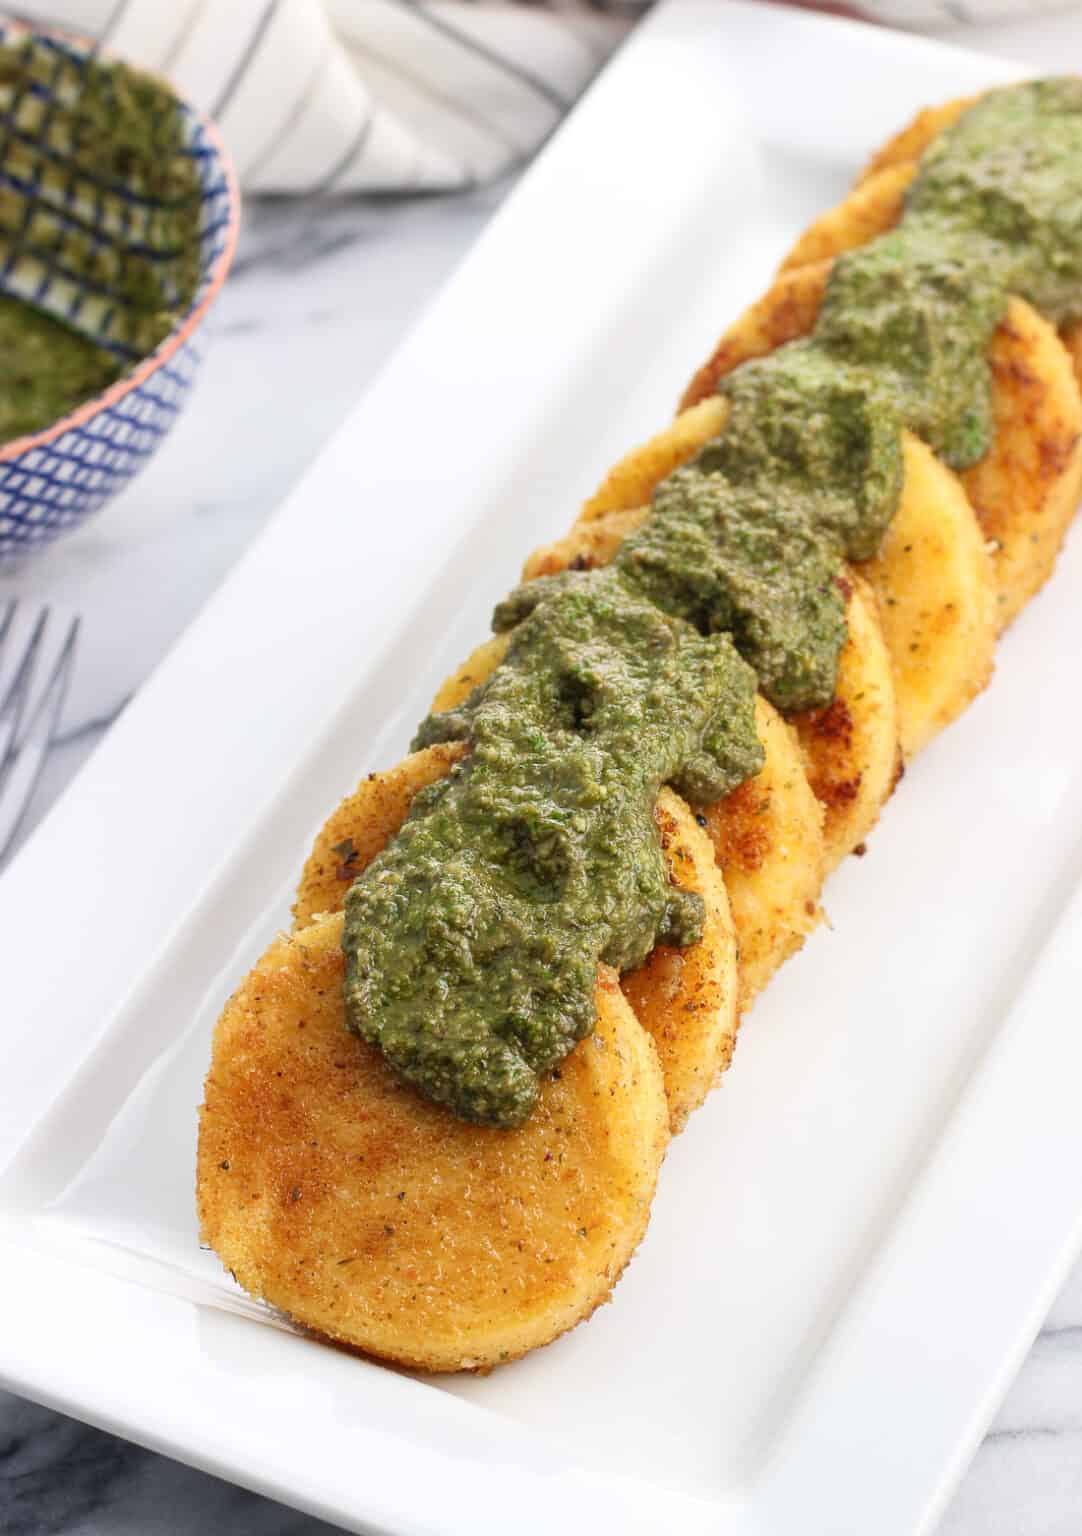 Parmesan Crusted Polenta with Pesto - My Sequined Life